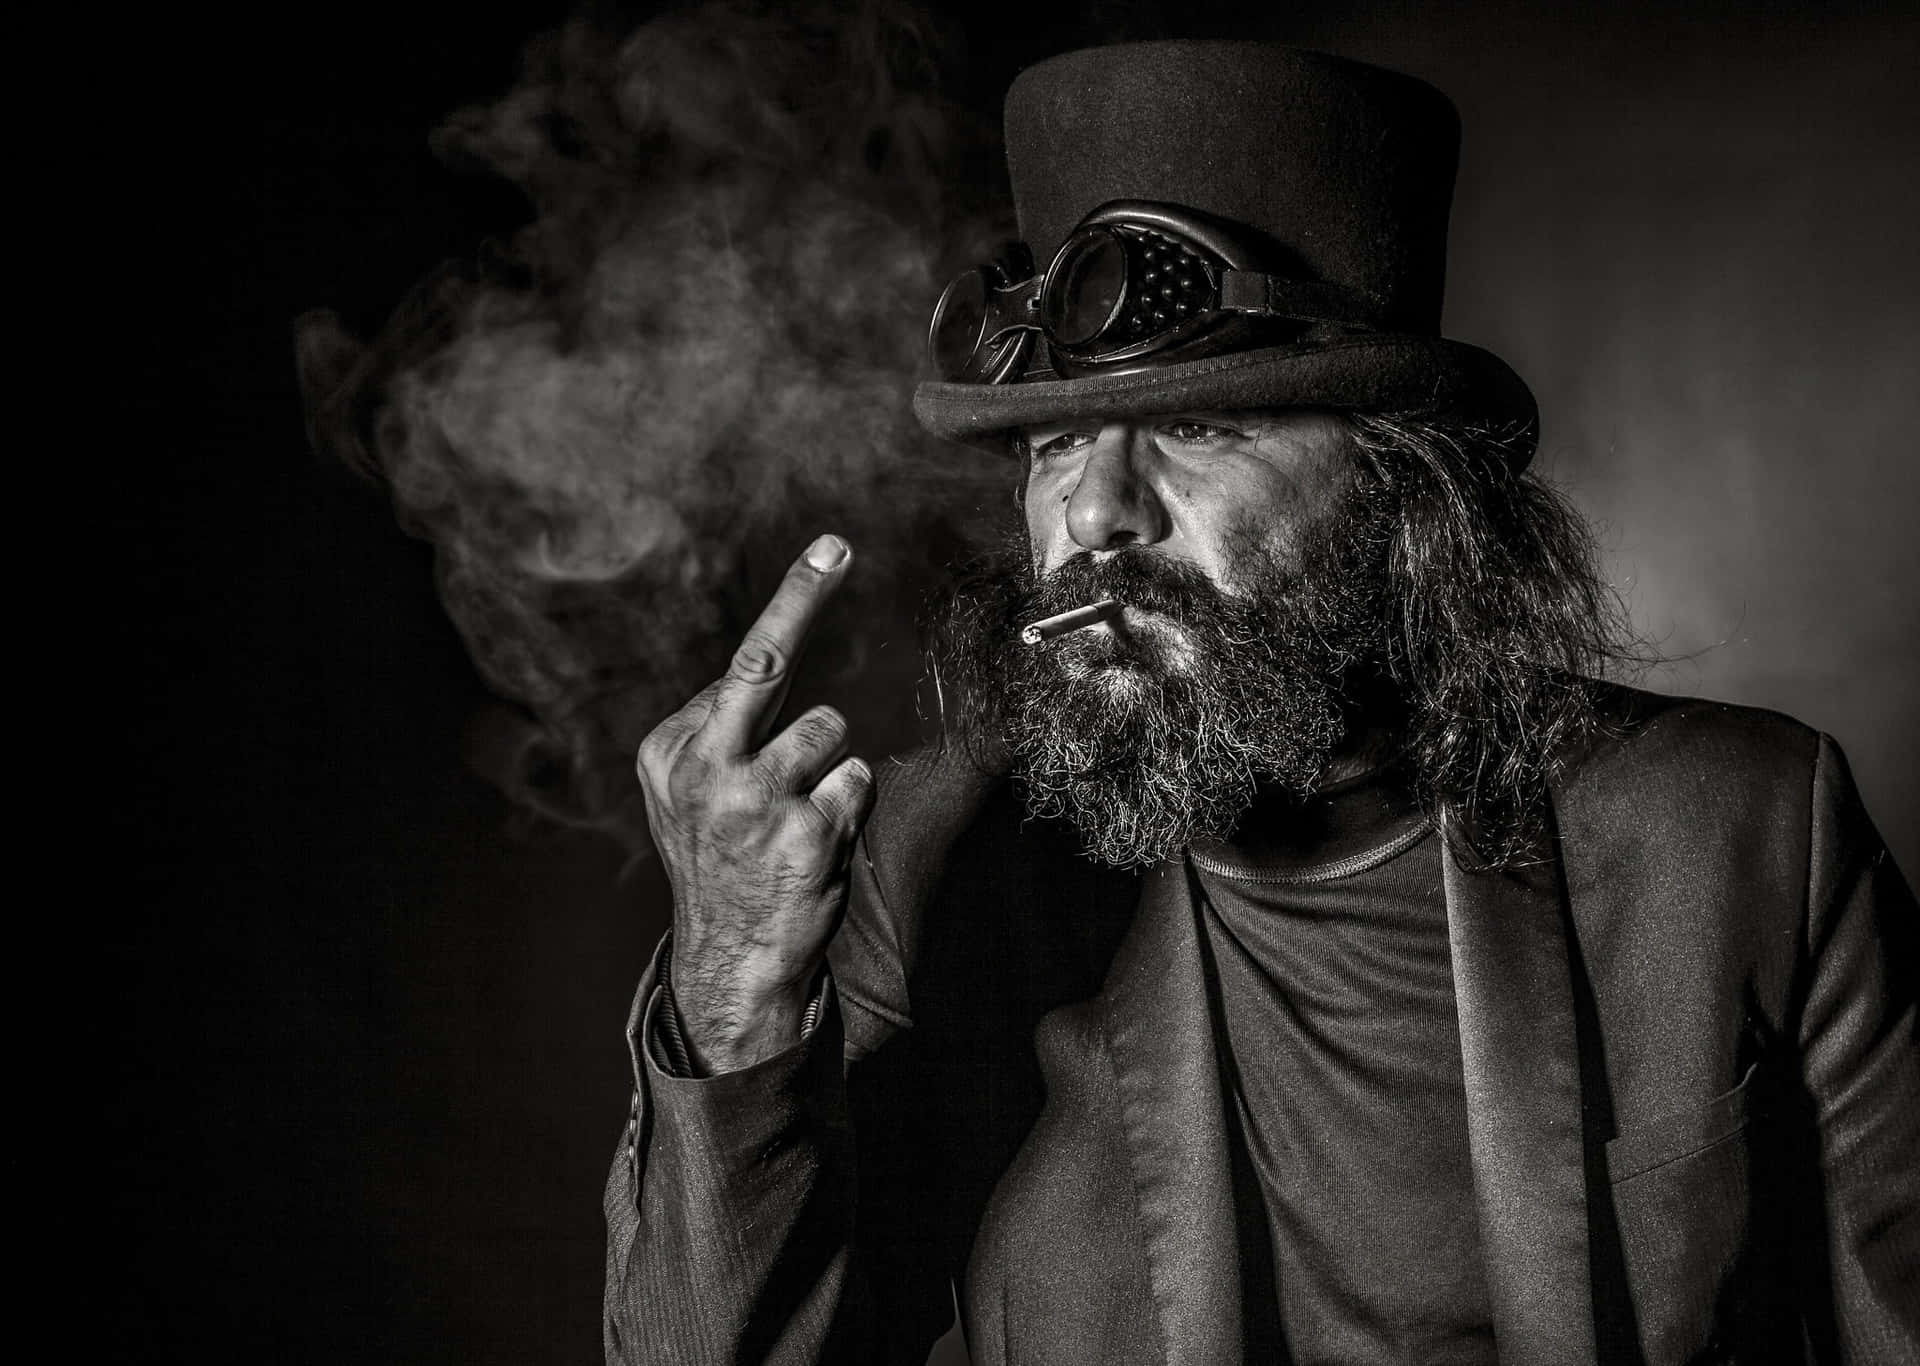 A Man With Long Hair And A Top Hat Smoking A Cigarette